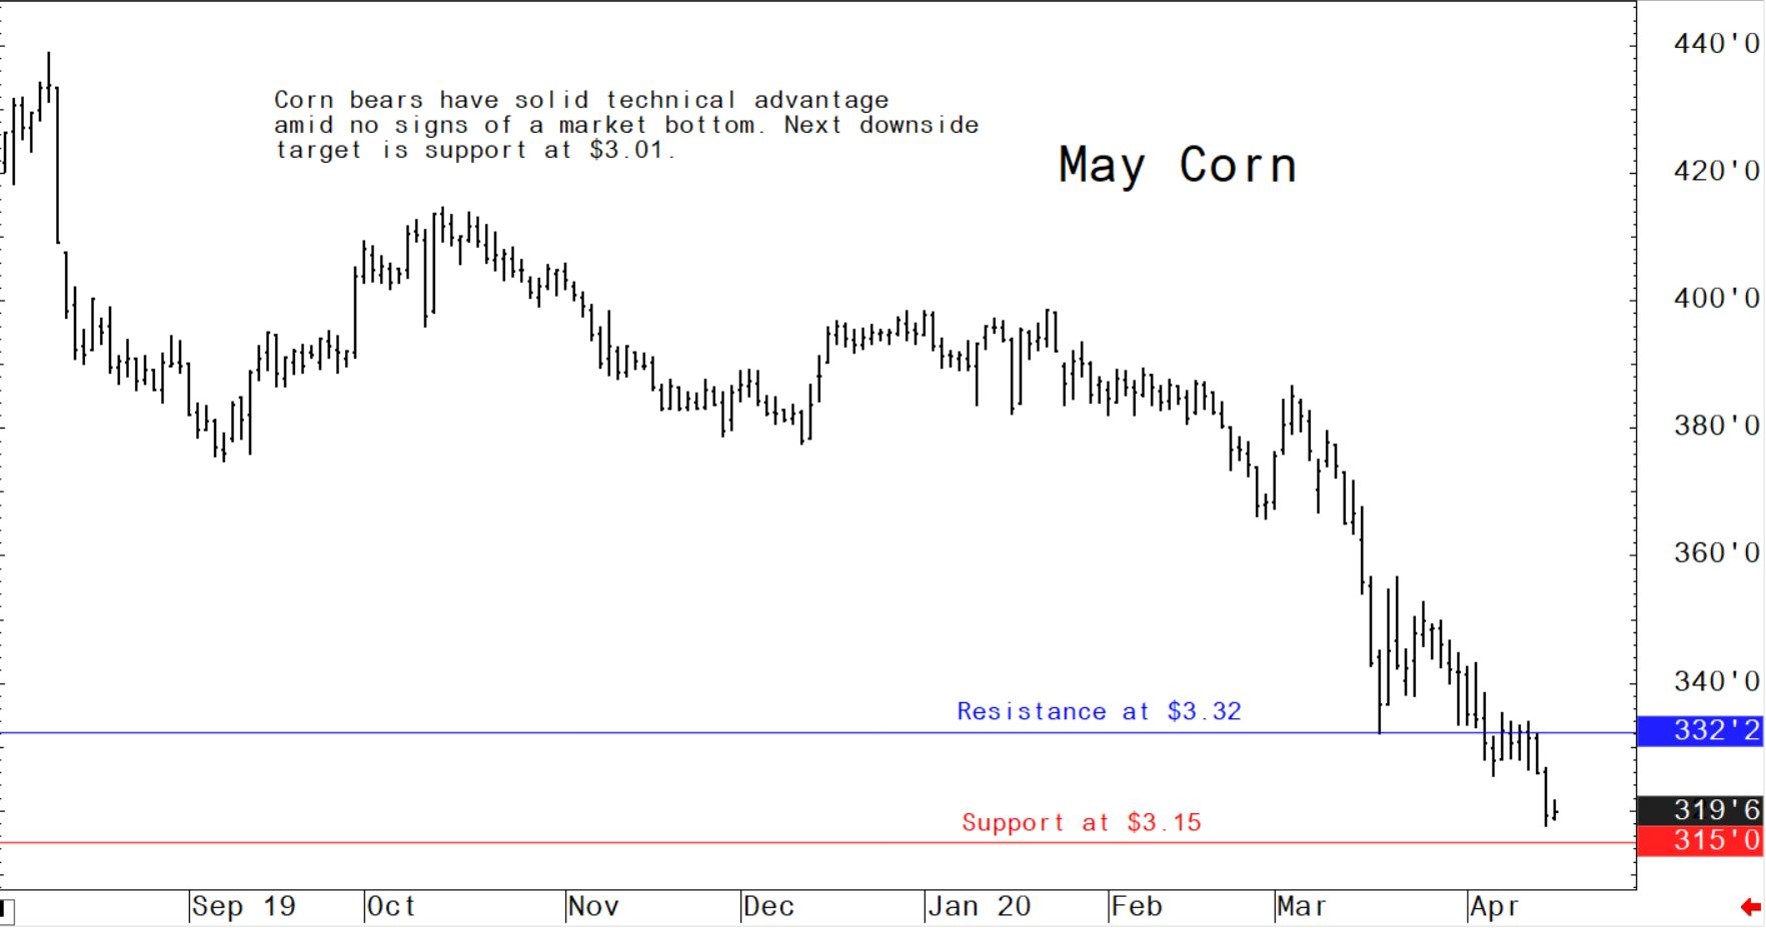 US corn bears have solid technical advantage amid no signs of a market bottom